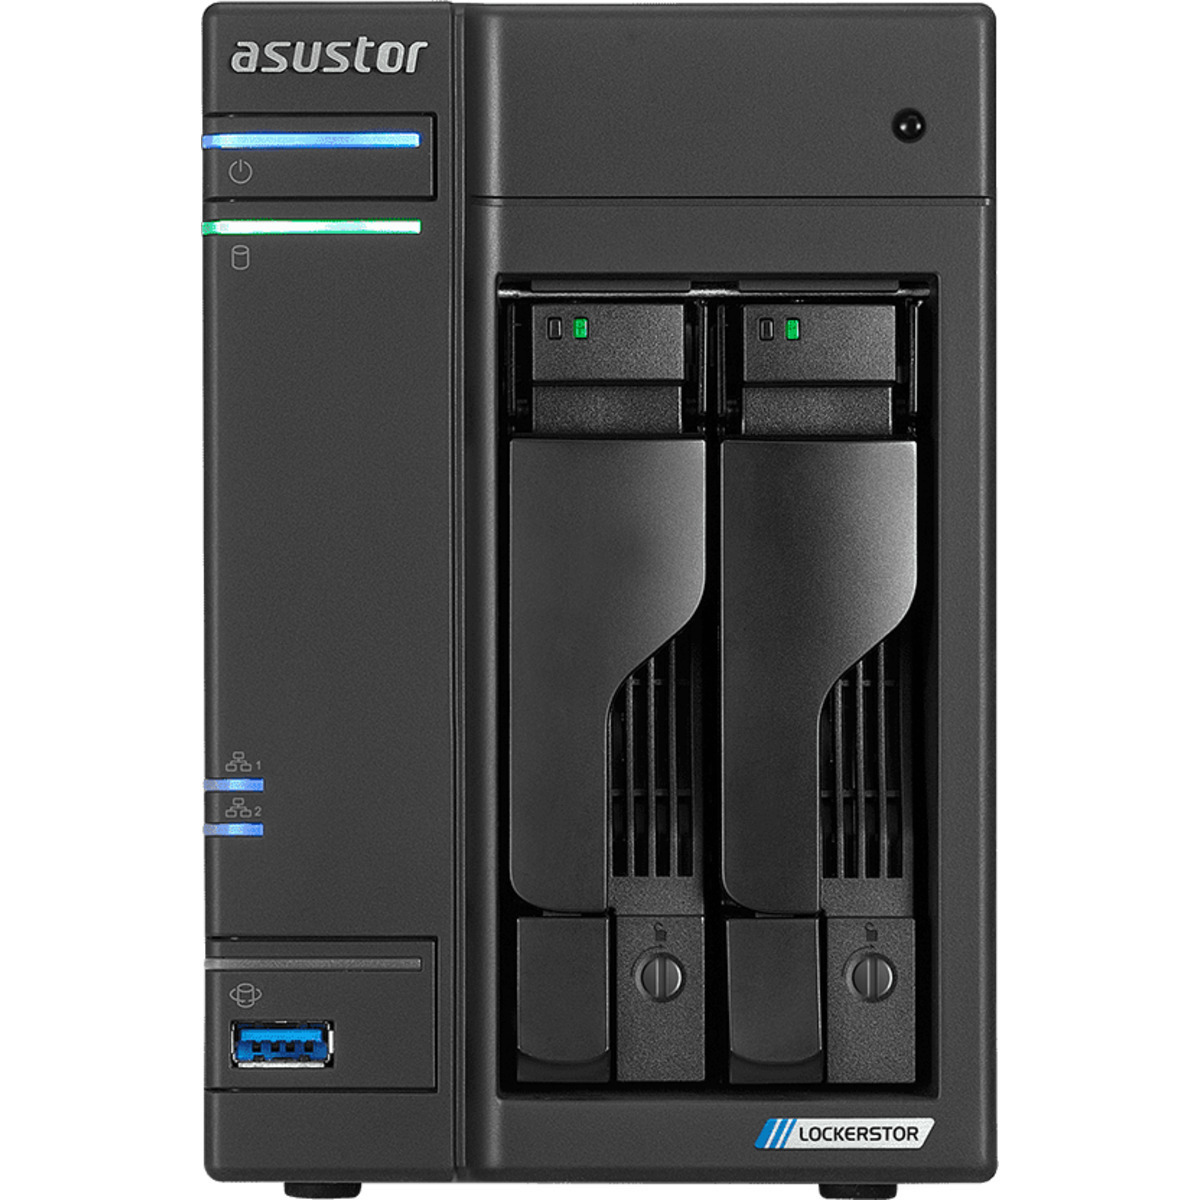 buy $2405 ASUSTOR AS6602T Lockerstor 2 7.6tb Desktop NAS - Network Attached Storage Device 2x3840gb Seagate IronWolf Pro 125 ZA3840NX10001 2.5 SATA 6Gb/s SSD NAS Class Drives Installed - Burn-In Tested - FREE RAM UPGRADE - nas headquarters buy network attached storage server device das new raid-5 free shipping usa christmas new year holiday sale AS6602T Lockerstor 2